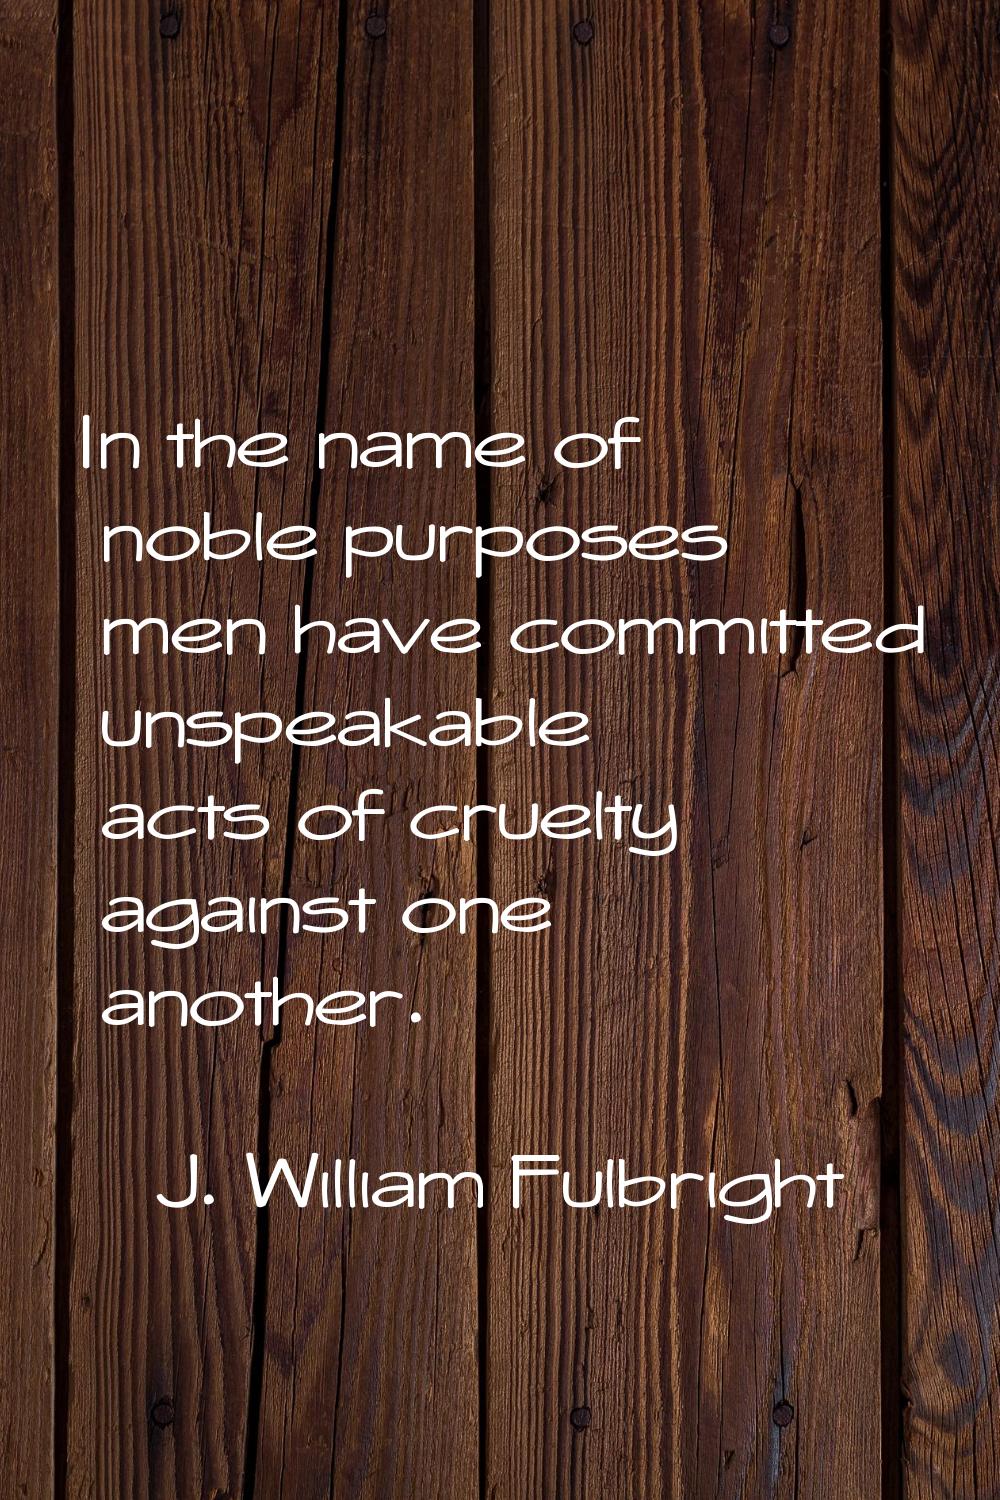 In the name of noble purposes men have committed unspeakable acts of cruelty against one another.